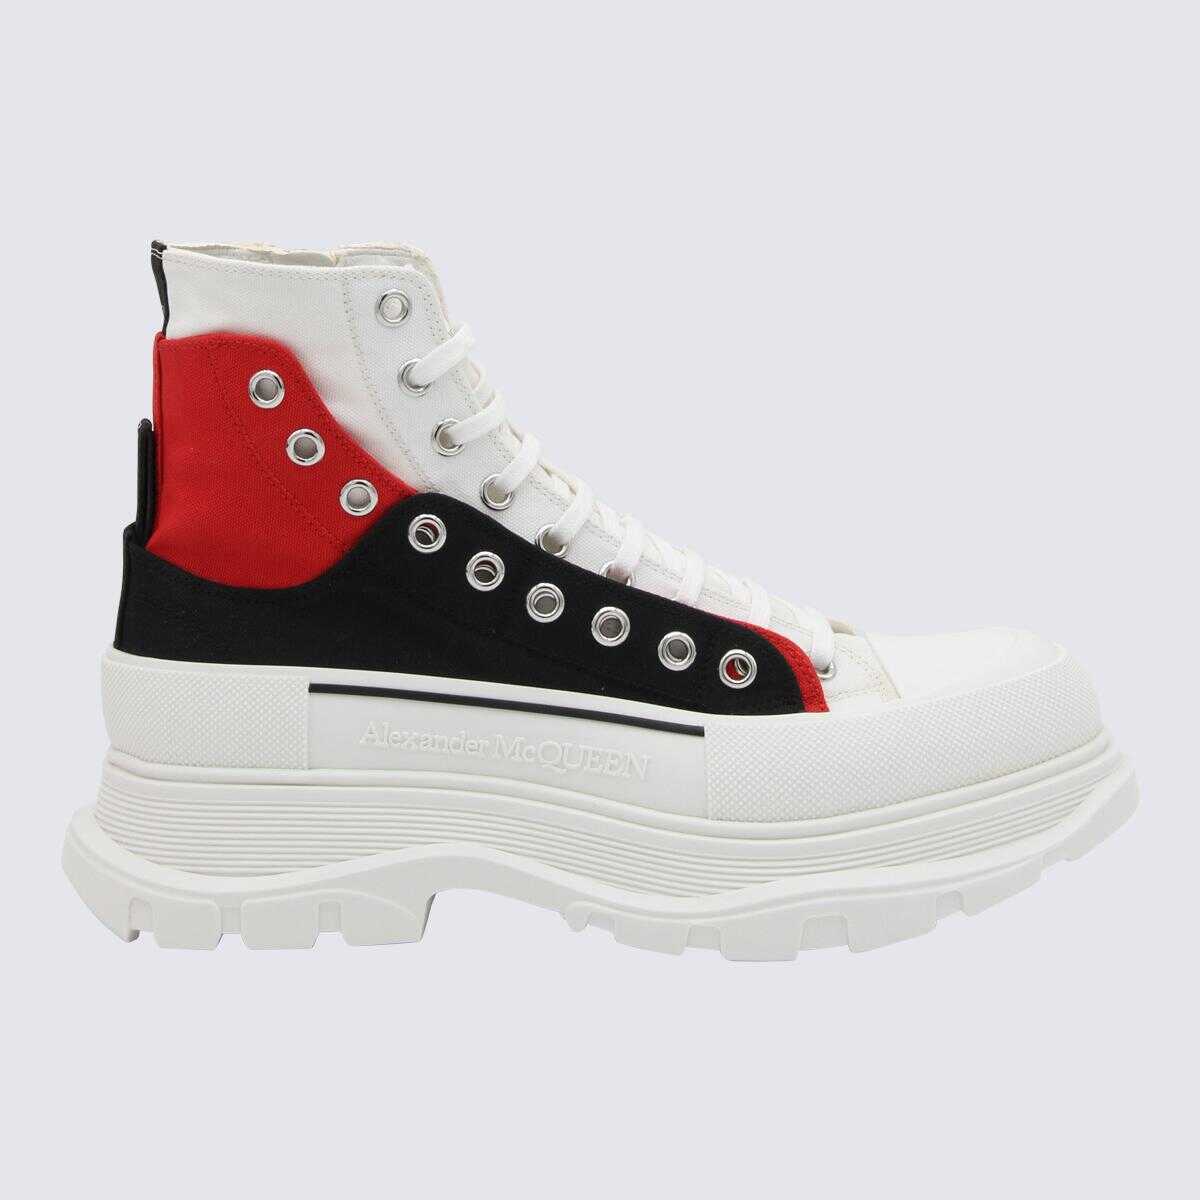 Alexander McQueen ALEXANDER MCQUEEN WHITE BLACK AND RED CANVAS TREAD SLICK LACE UP FASTENING BOOTS BLK/L.R/WH/OF.W/B./S